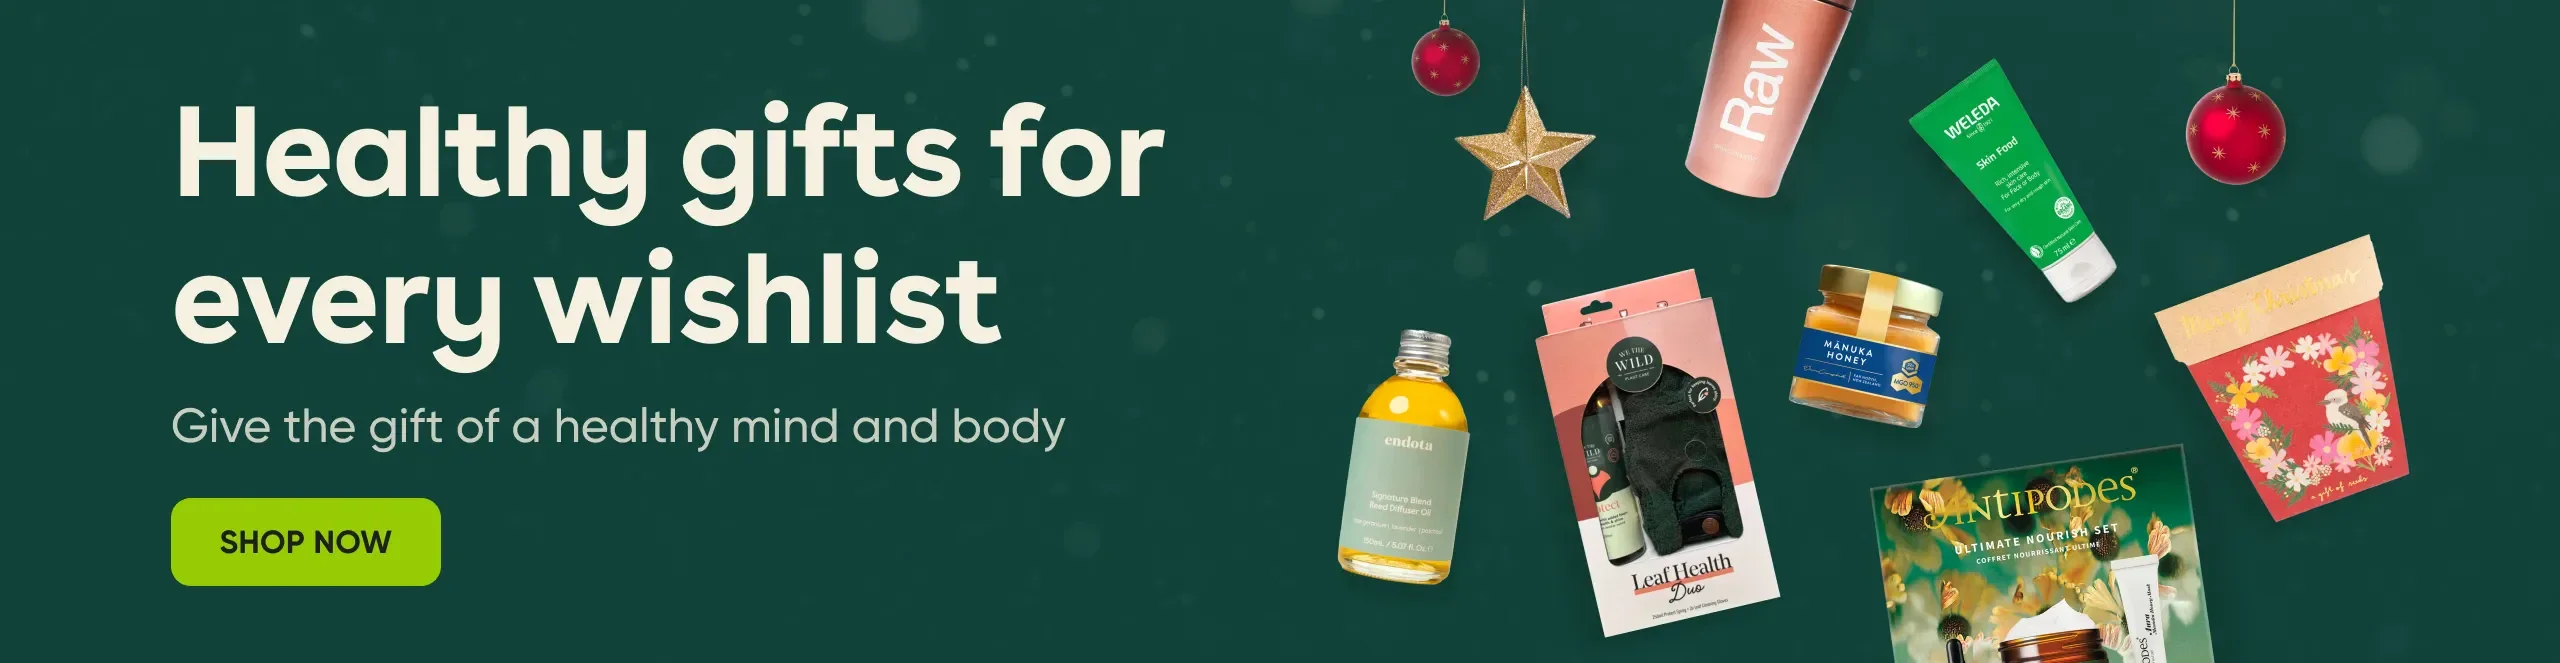 Healthy Gifts For Every Wishlist. Give the gift of a healthy mind and body